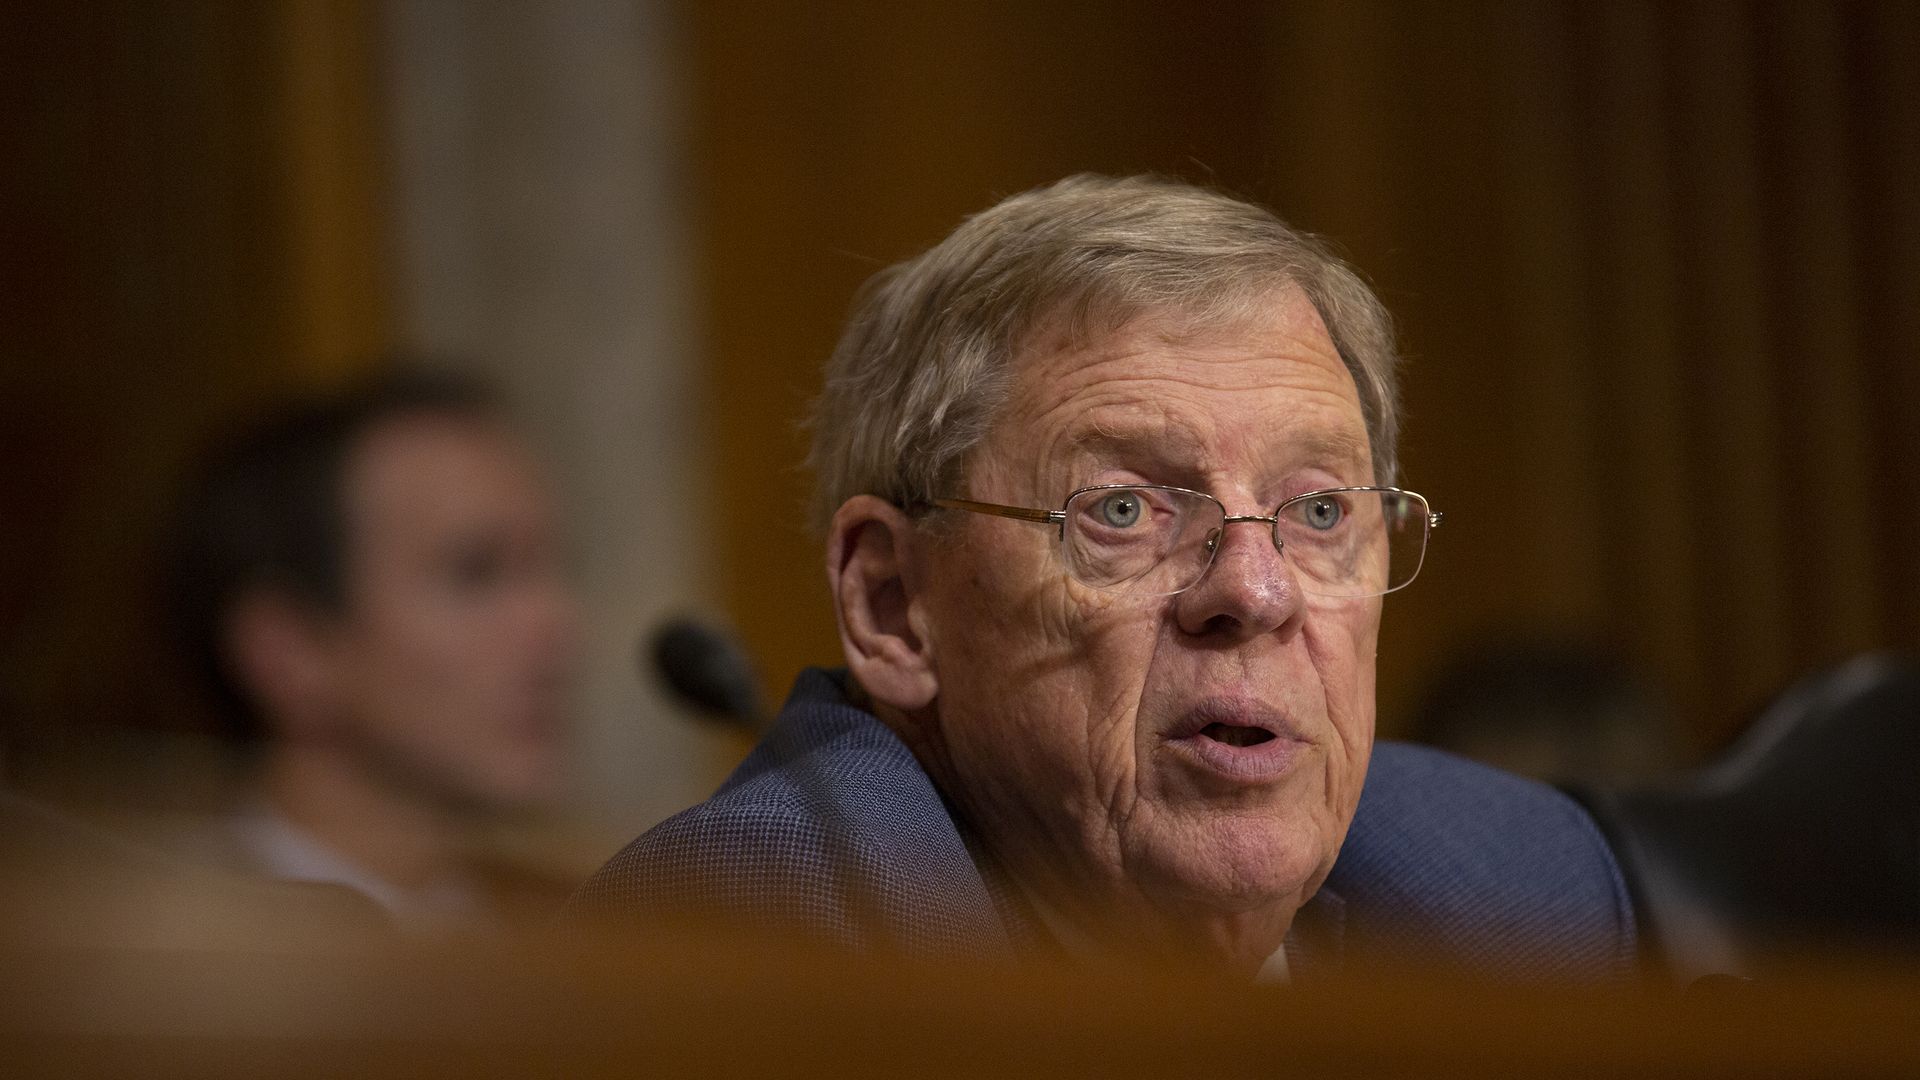 Sen. Johnny Isakson (R-GA) questions Kelly Craft, President Trump's nominee to be Representative to the United Nations, during her nomination hearing on June 19.